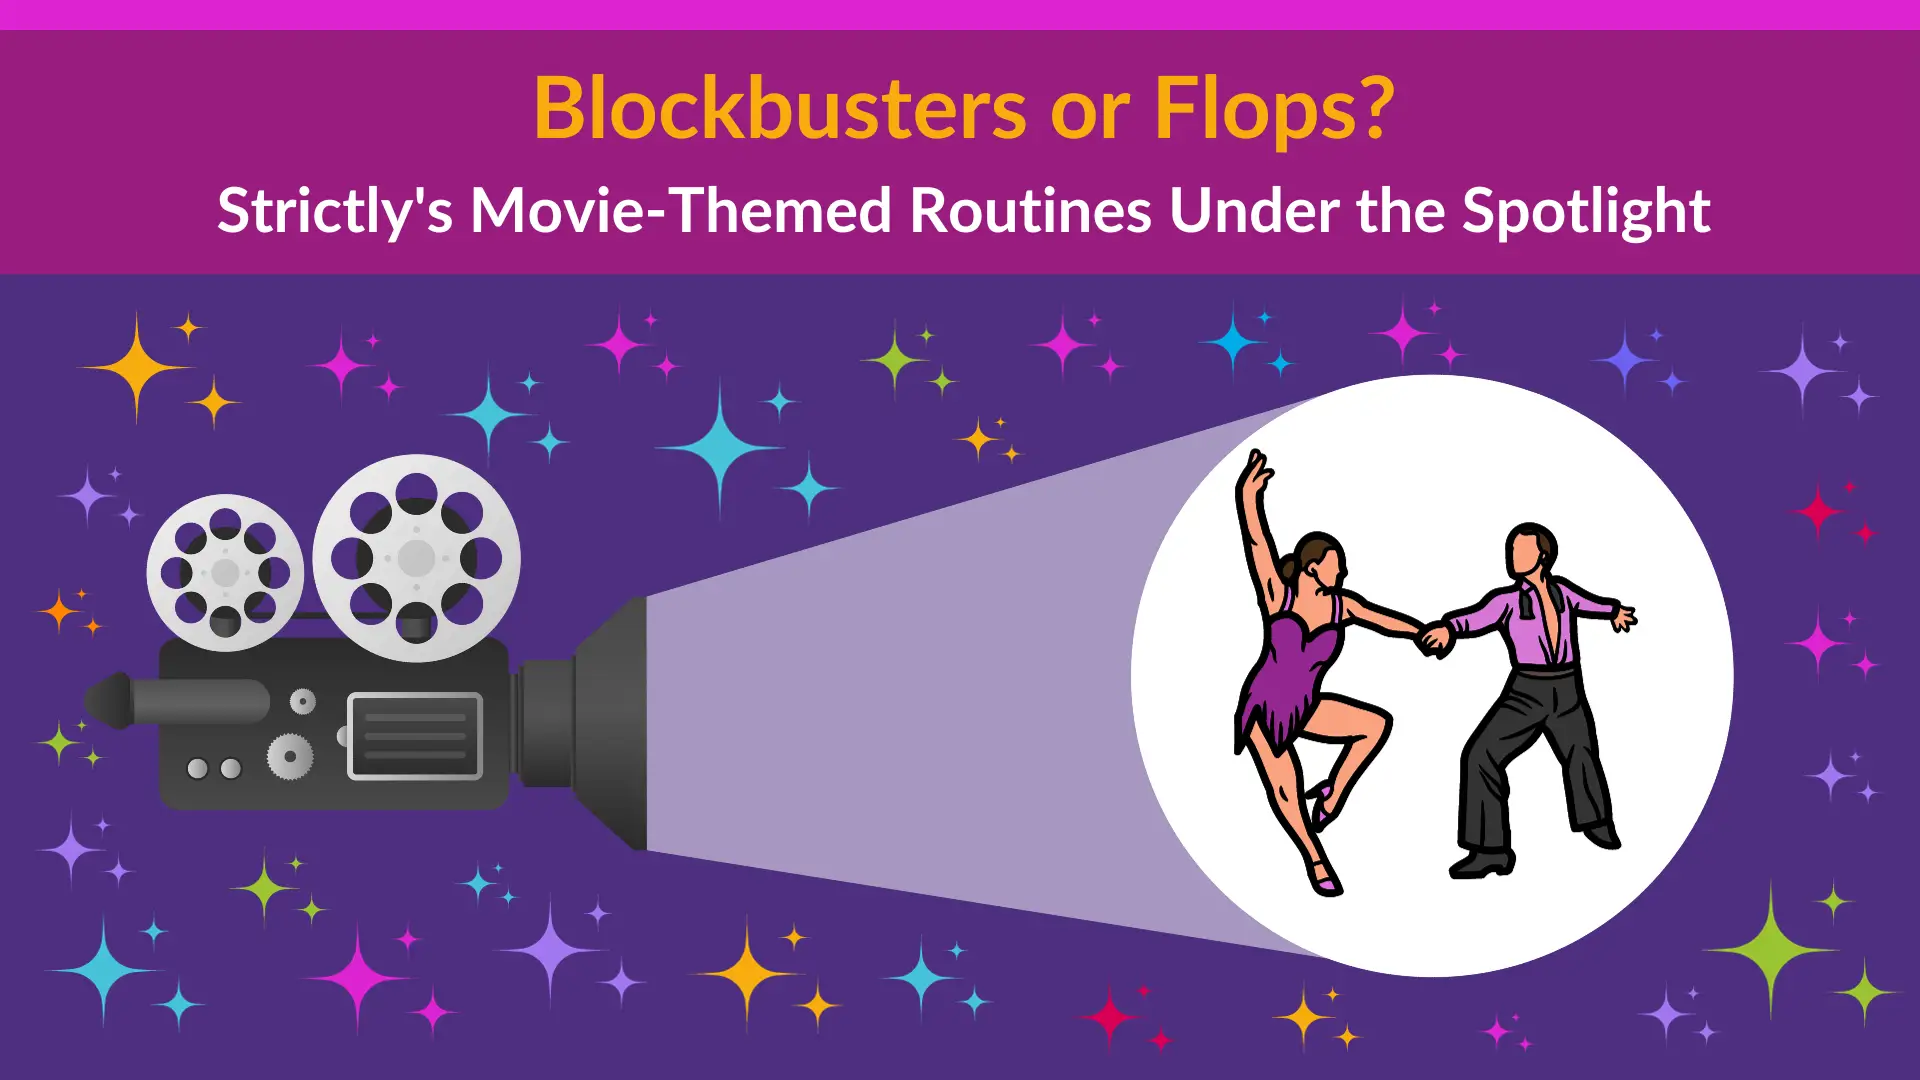 Blockbuster or flop : Movie camera spotlighting on a couple dancing